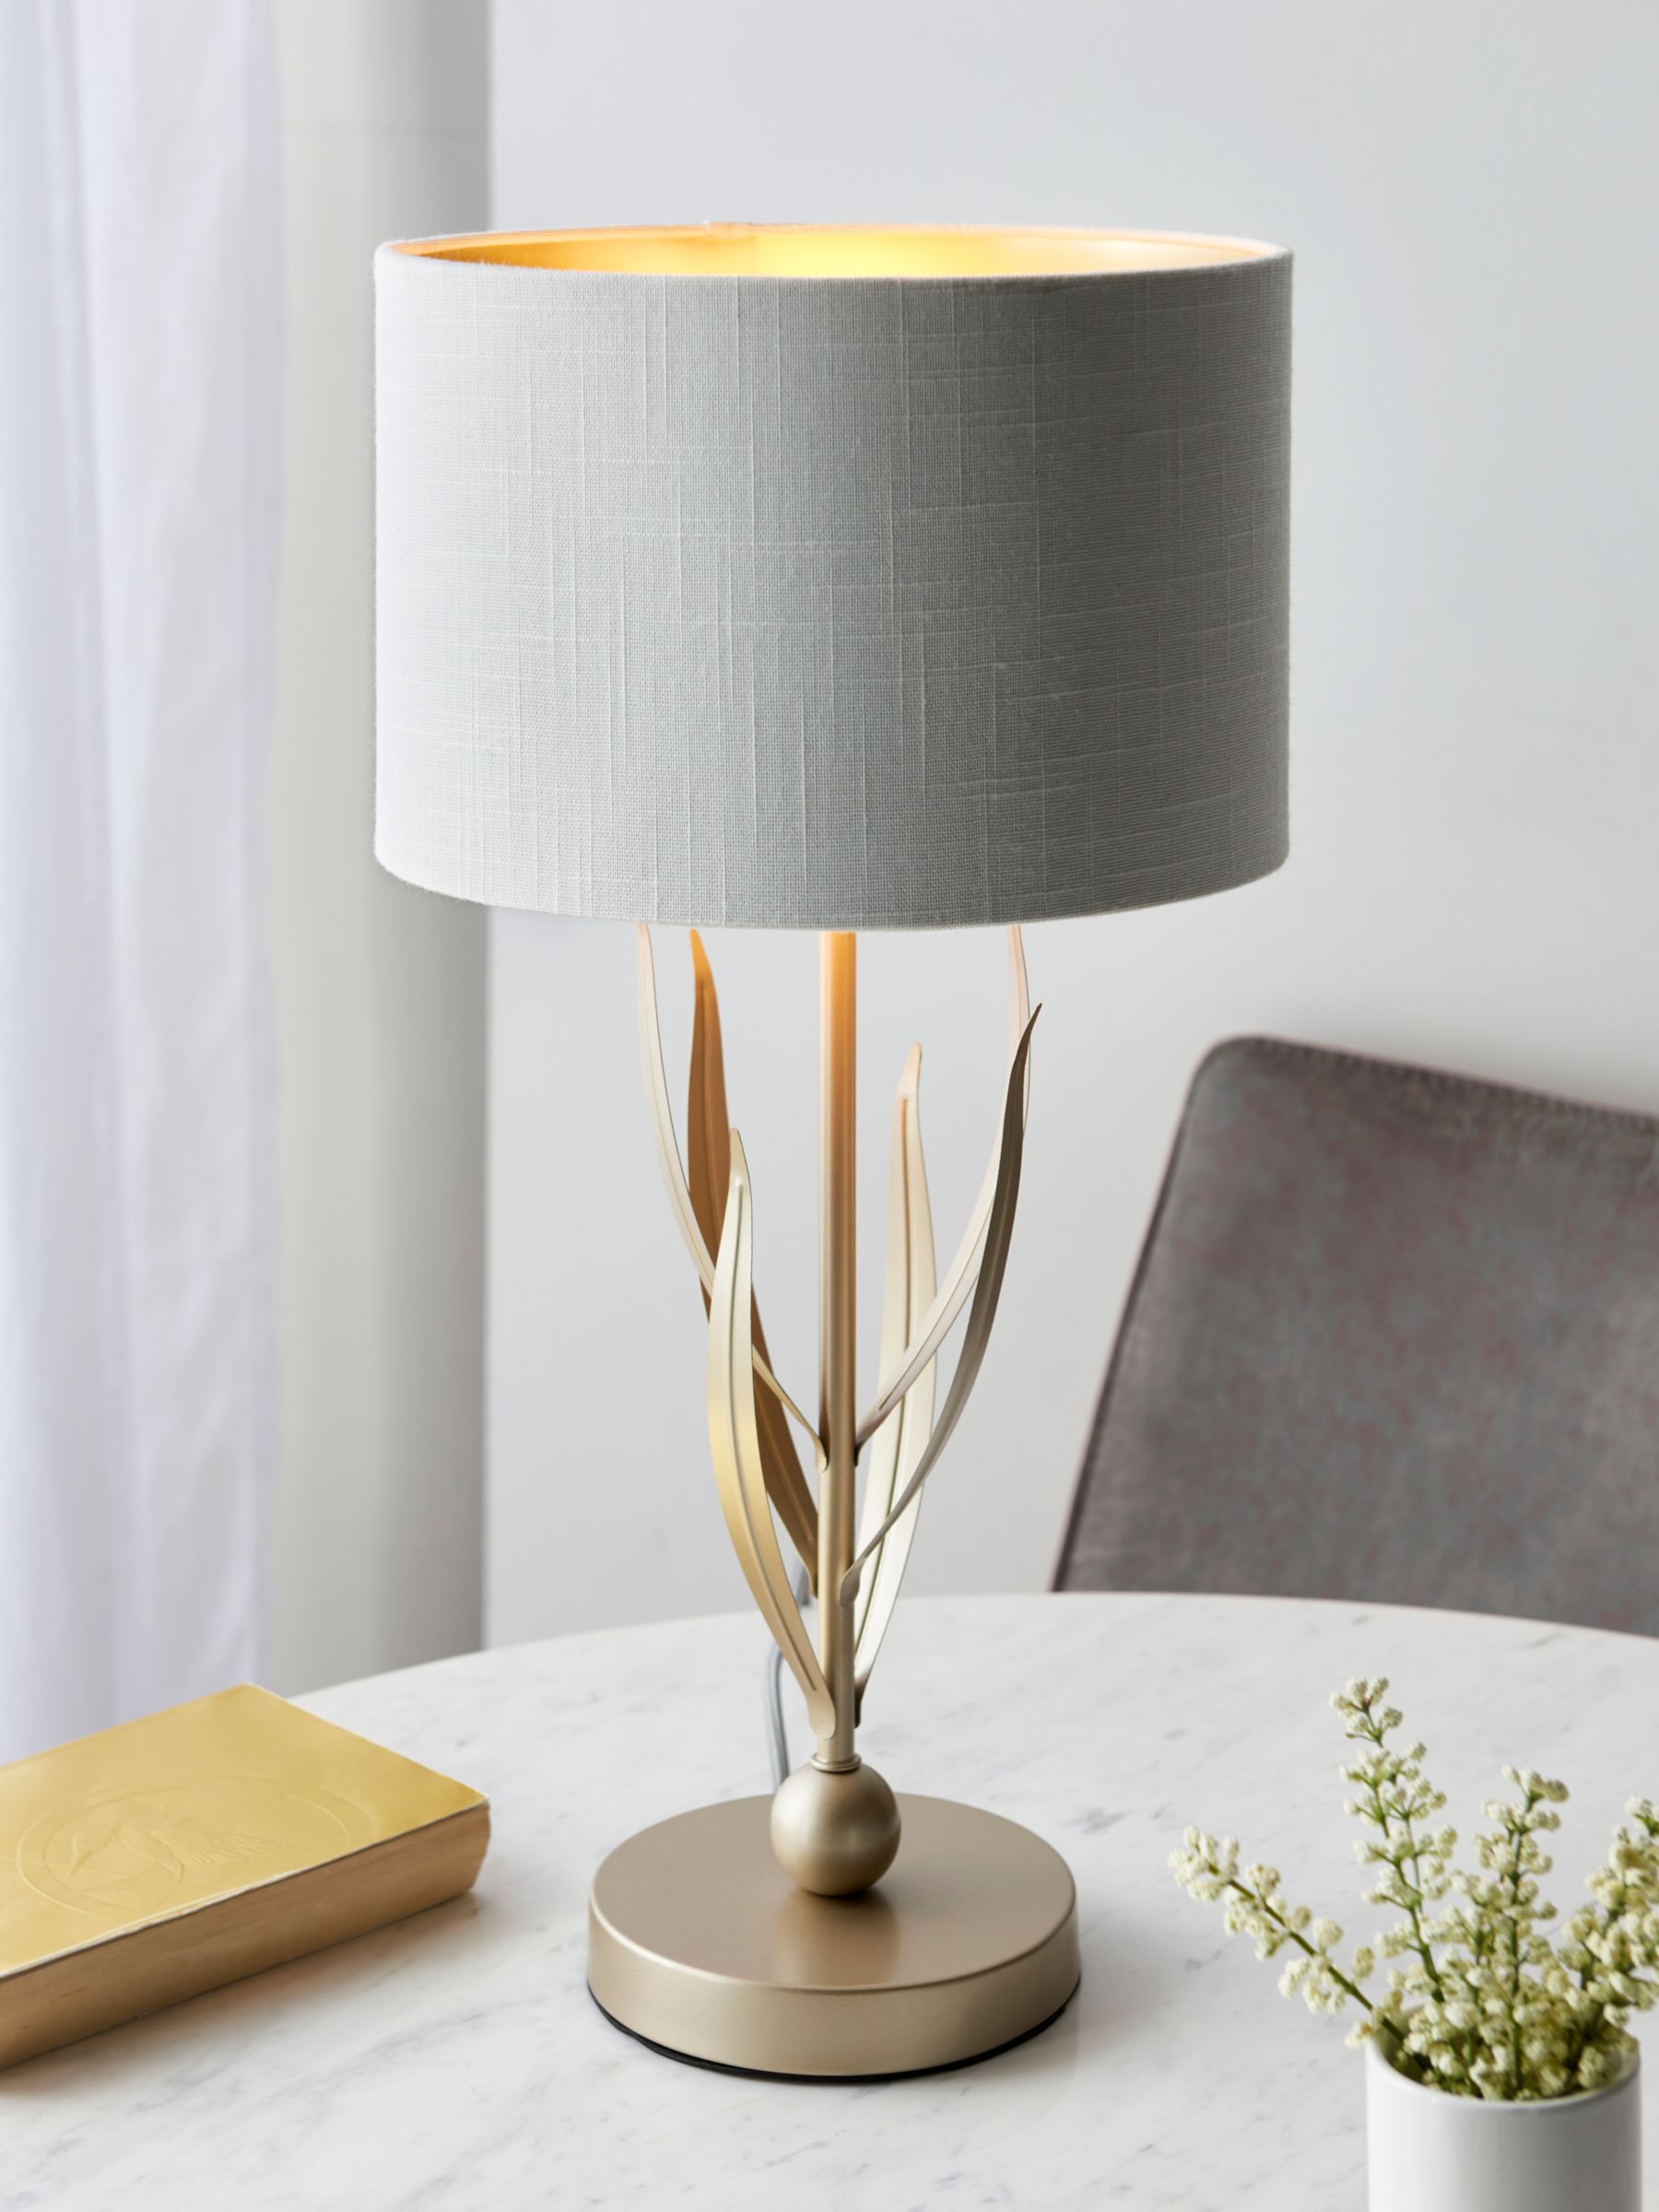 Partners Clemont Table Lamp Ivory Gold, John Lewis Table Lamps